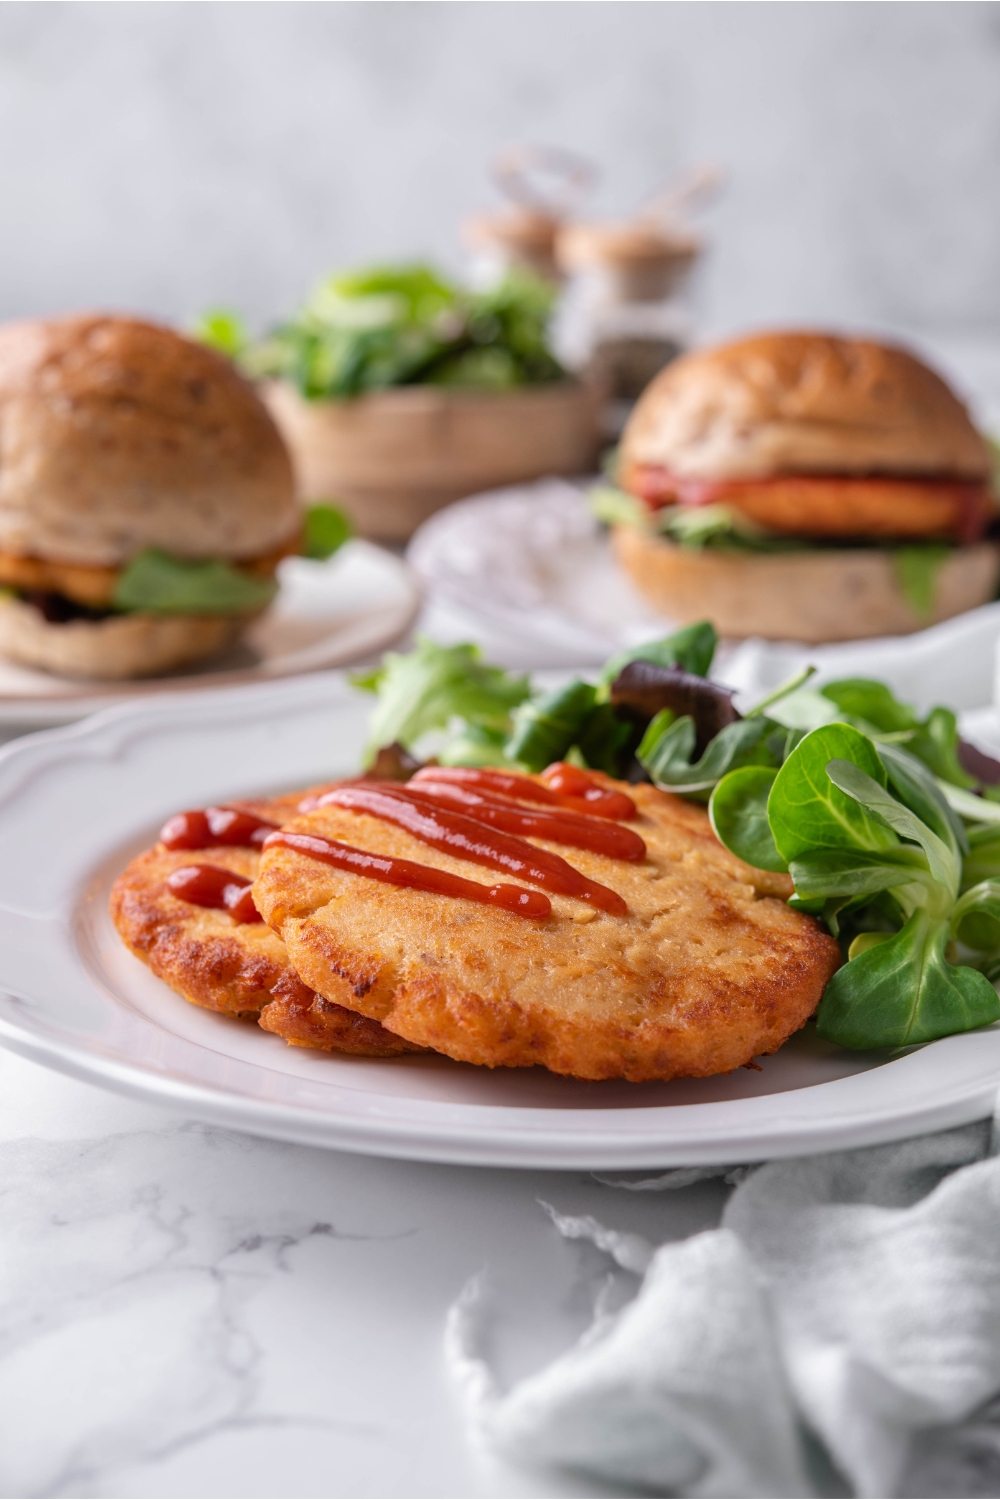 Two fried salmon patties covered with a drizzle of ketchup and layered on top of each other on a white plate with a side salad. In the background are two salmon burgers.